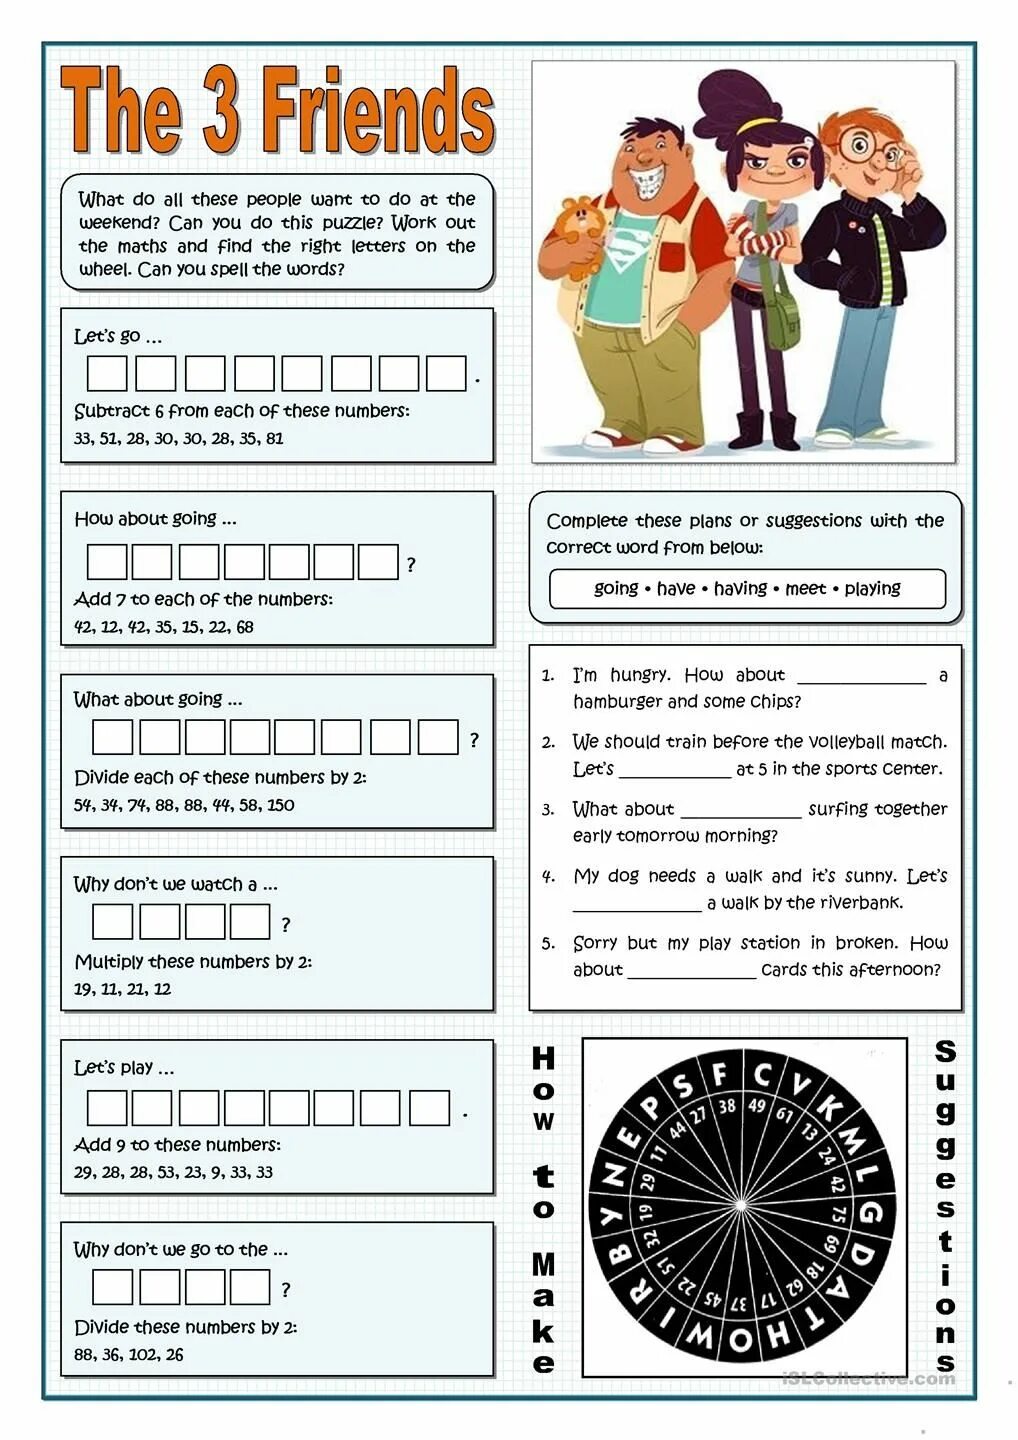 Friends about me spoken. Worksheet about Friendship. 2 Класс английский тема friends Worksheet. Making friends Worksheet. Friendship Vocabulary Worksheets.